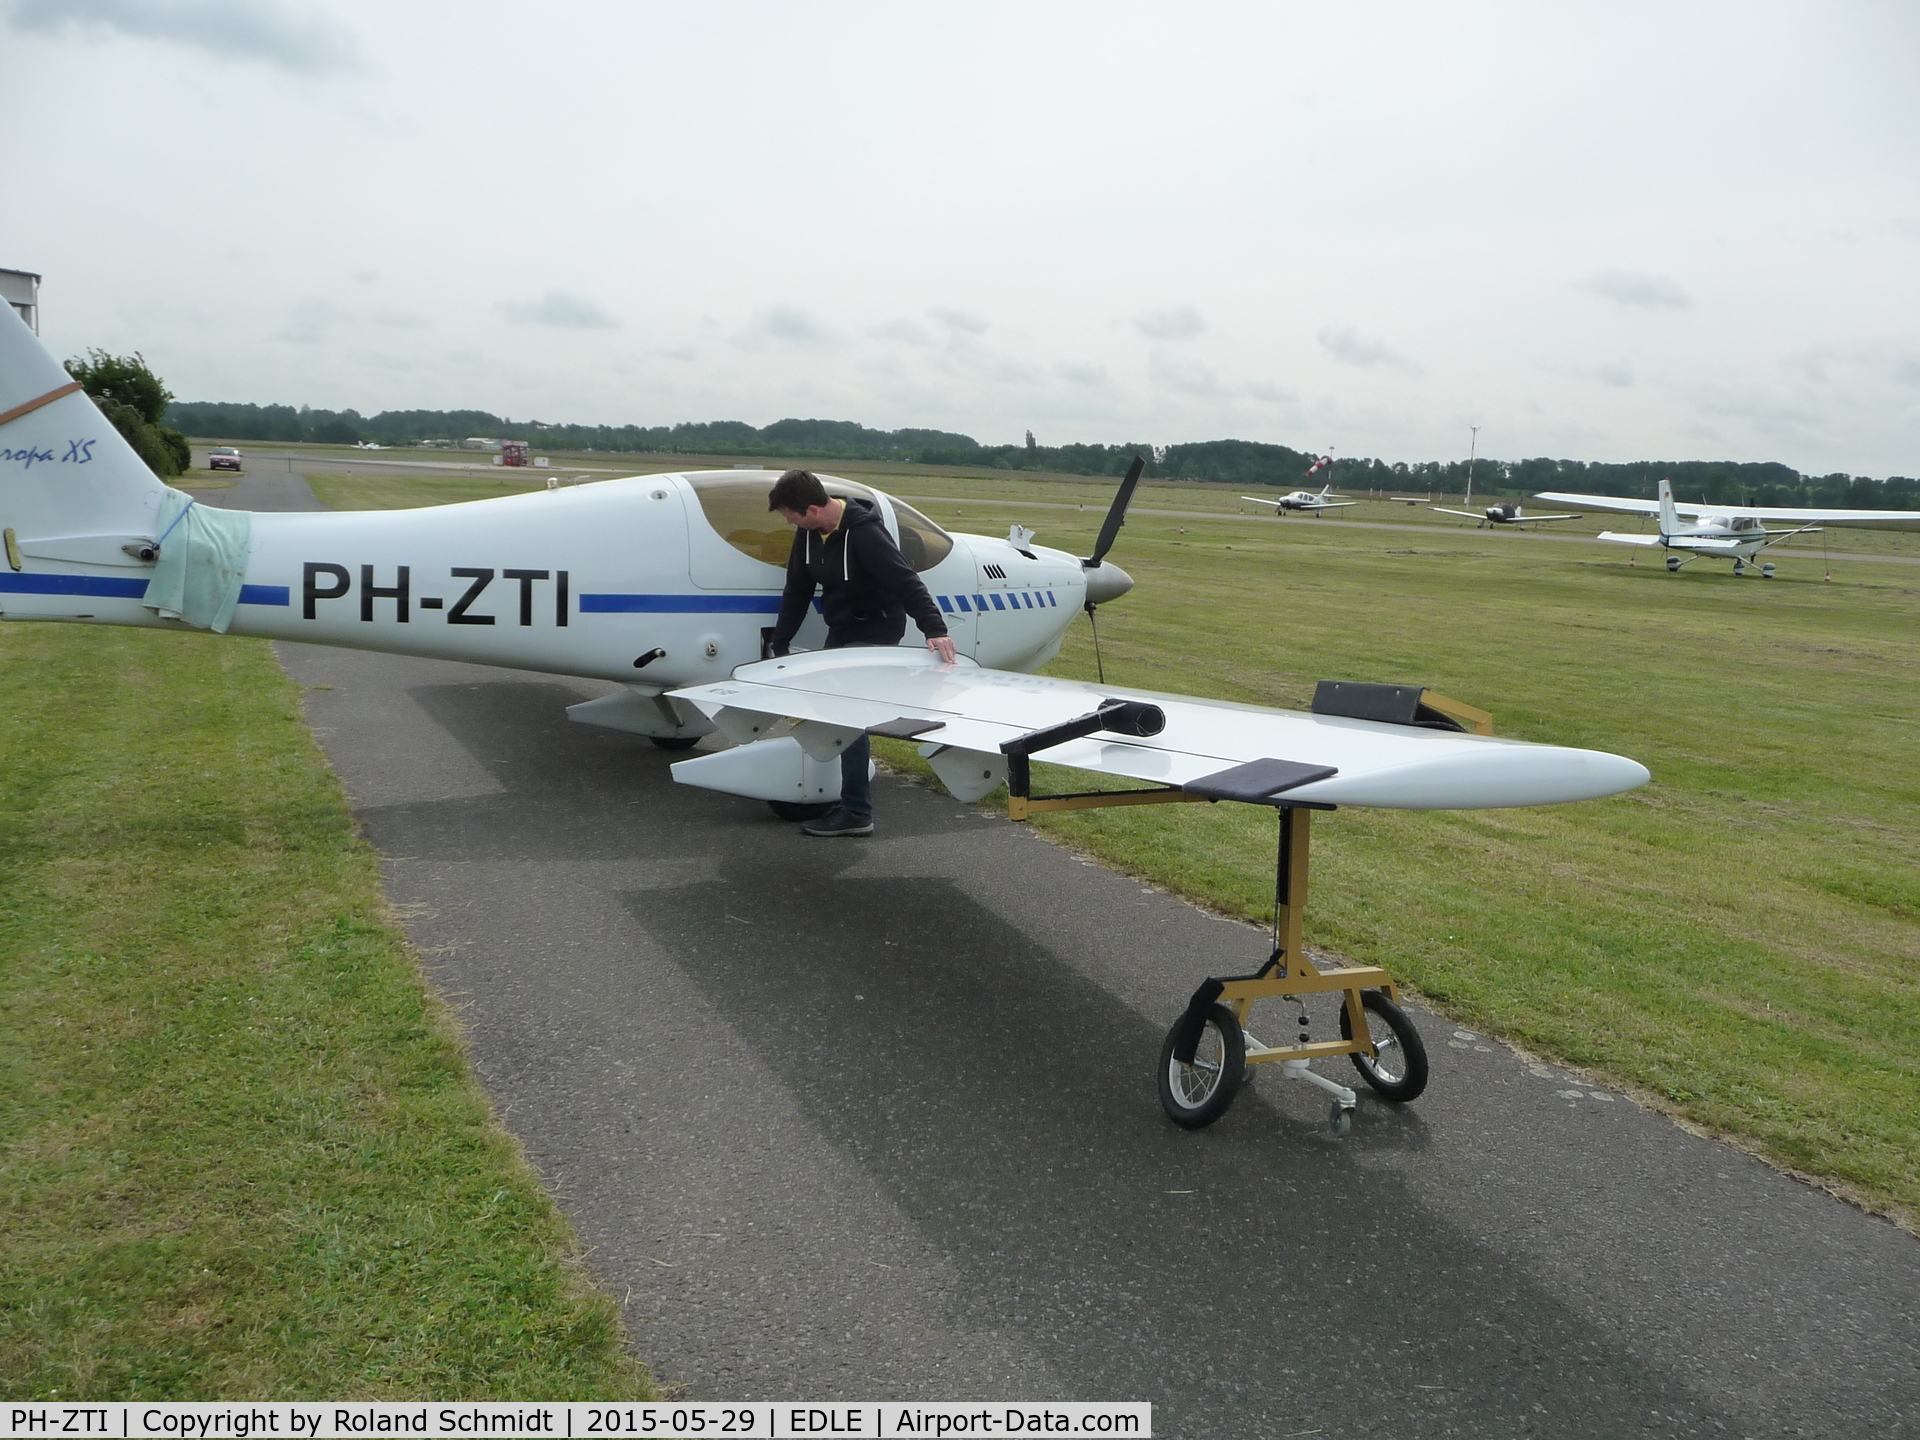 PH-ZTI, 2001 Europa XS Tri-Gear C/N PFA-247 13172, Can even be accomplished single hand with the Jütte rigging aid